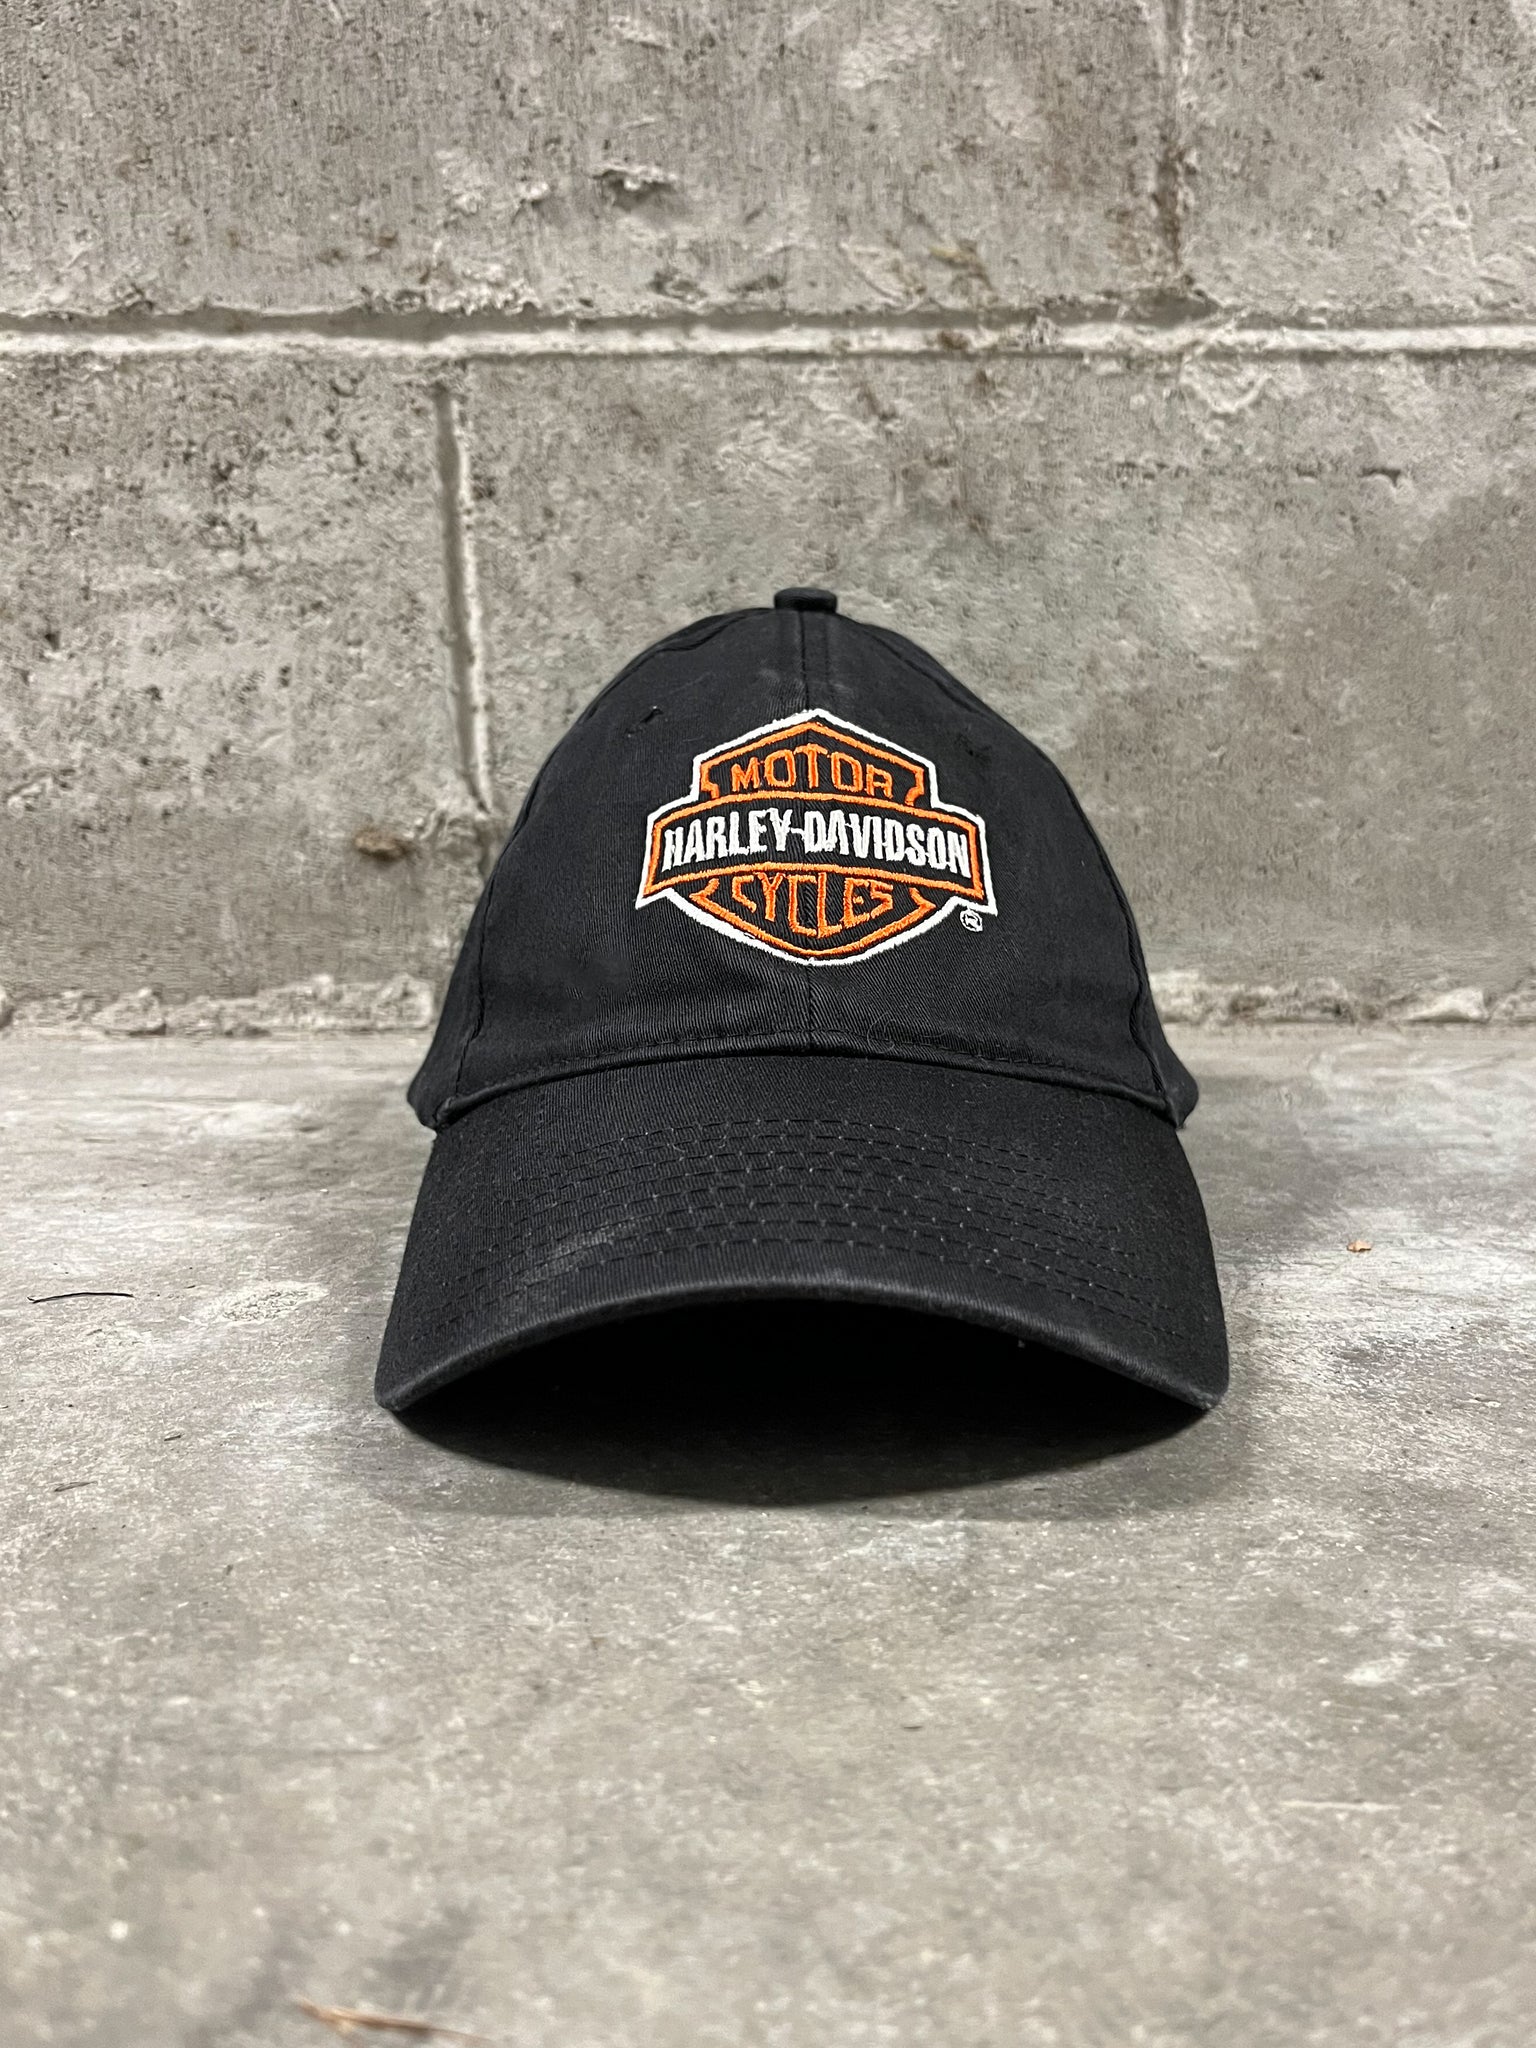 Harley Davidson Badge Fitted Cap / S-M